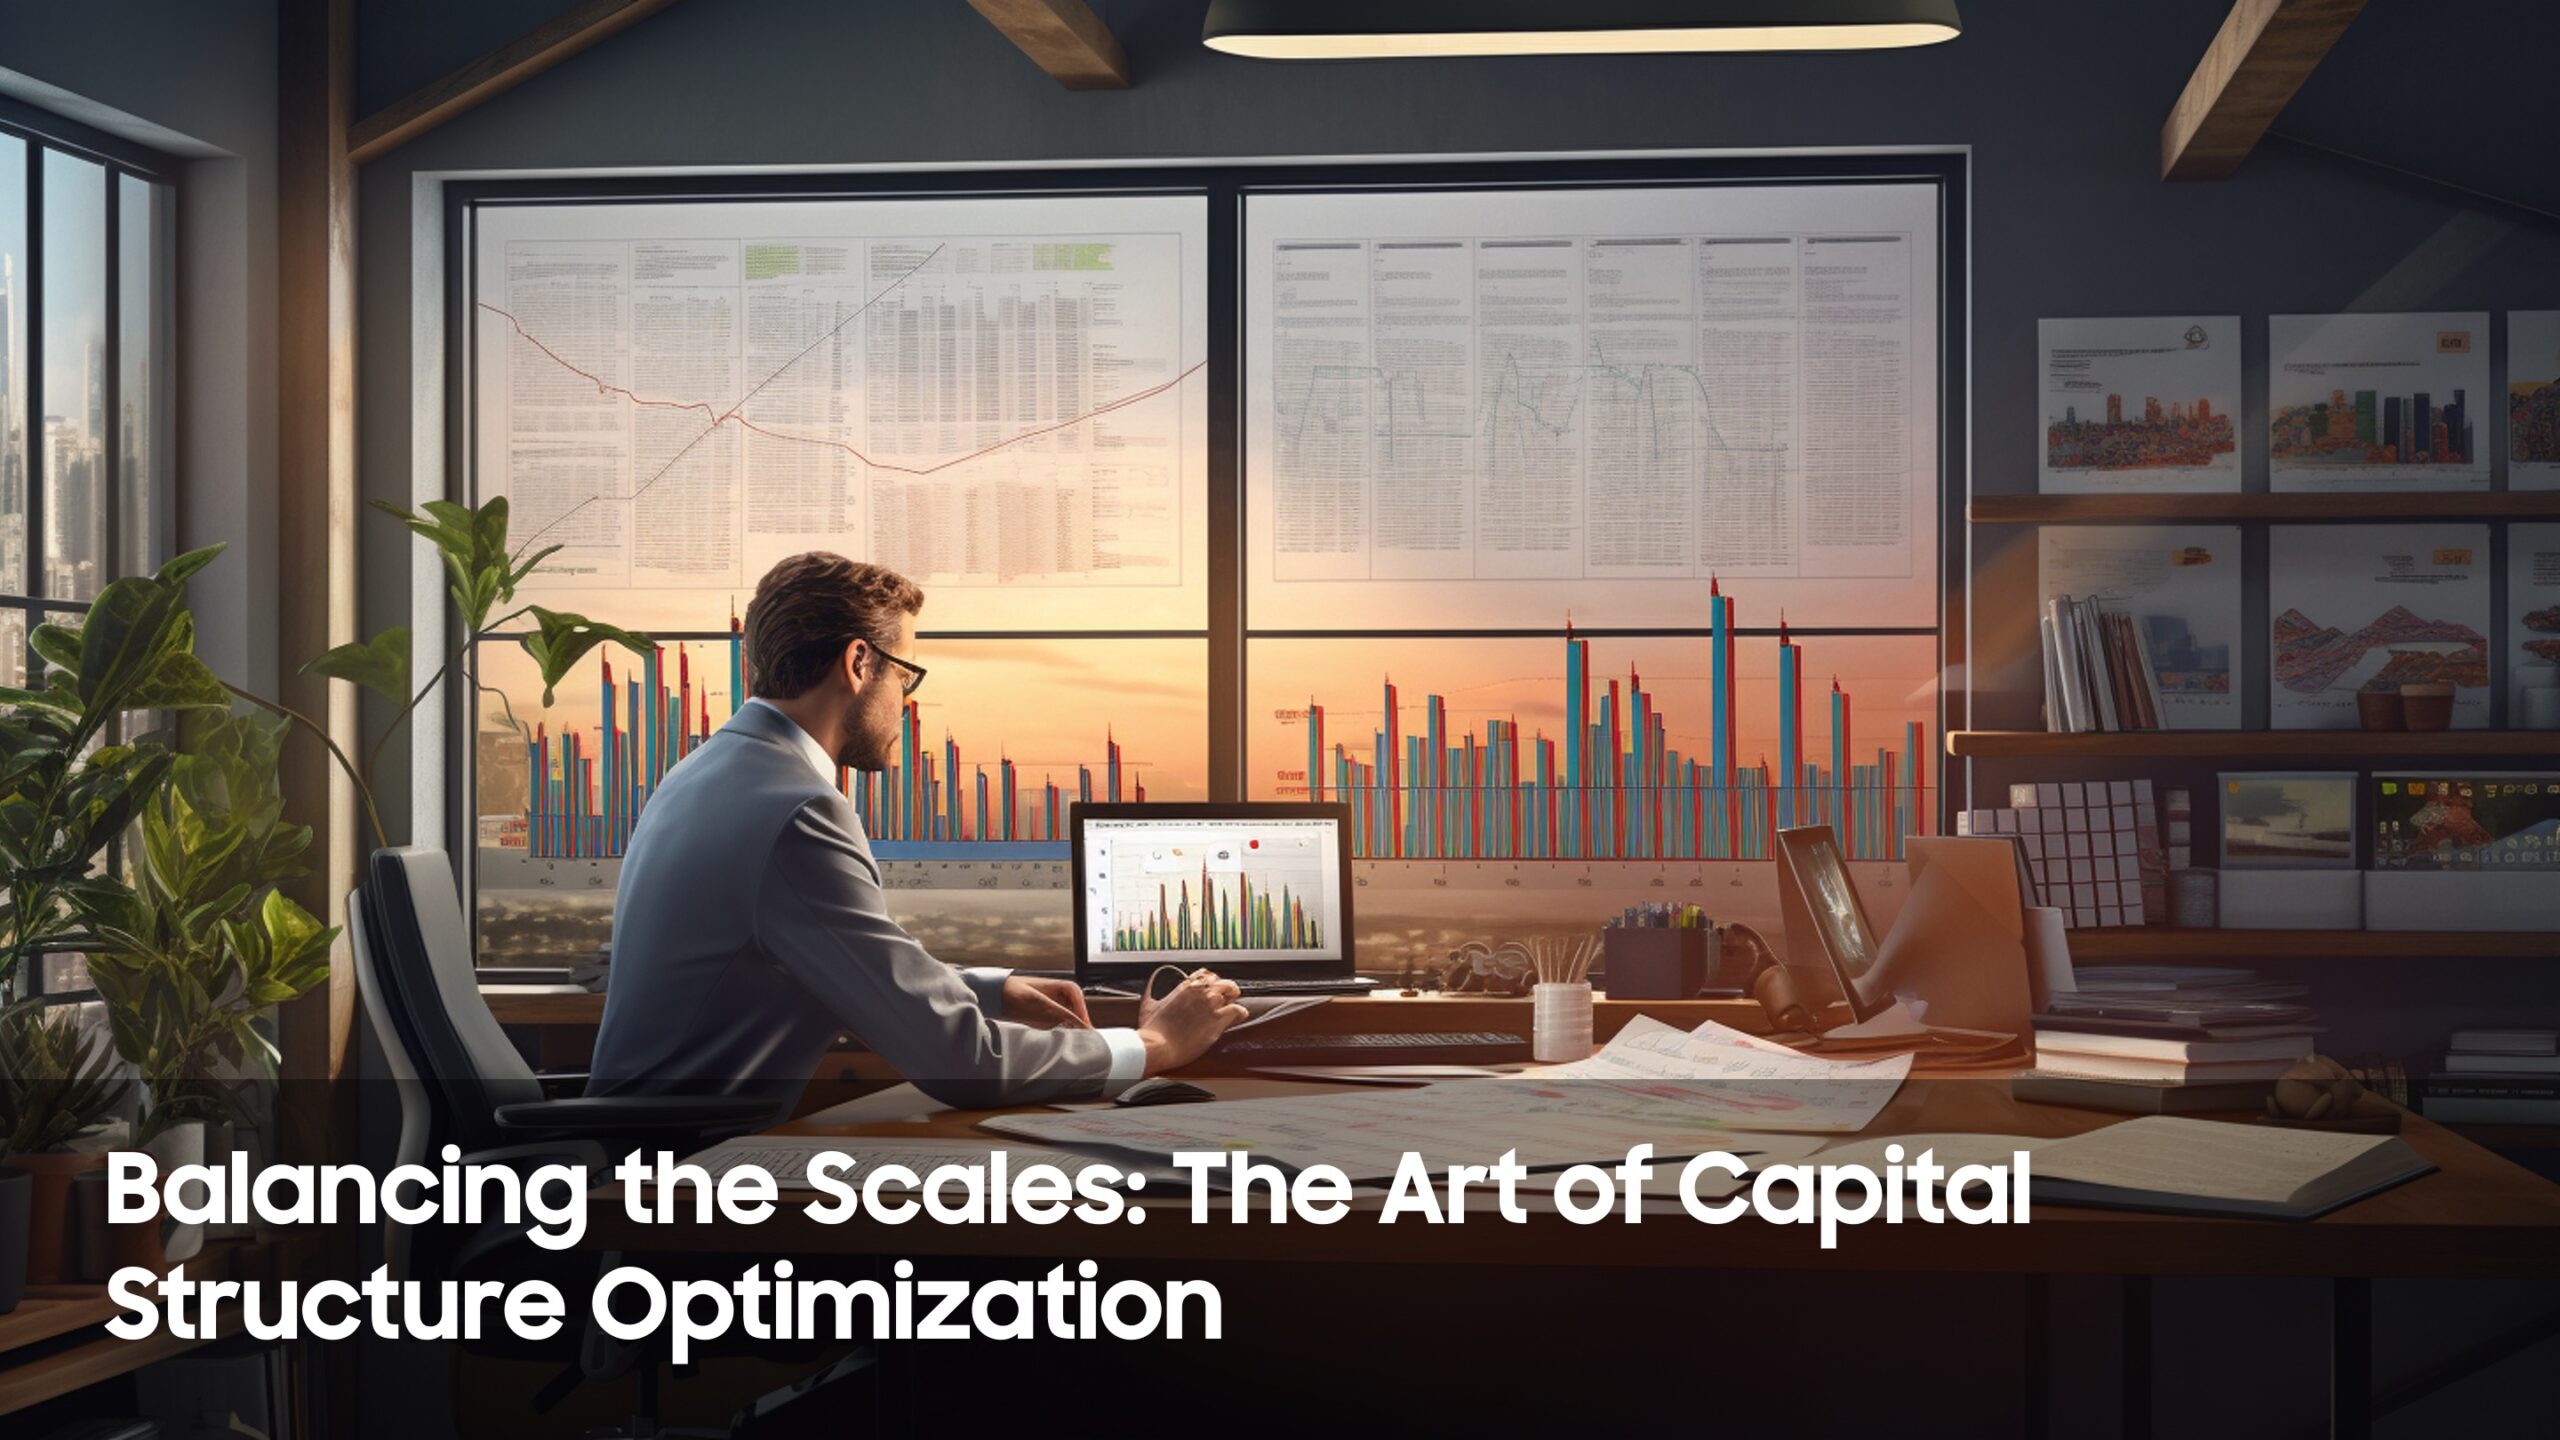 Balancing the Scales: The Art of Capital Structure Optimization